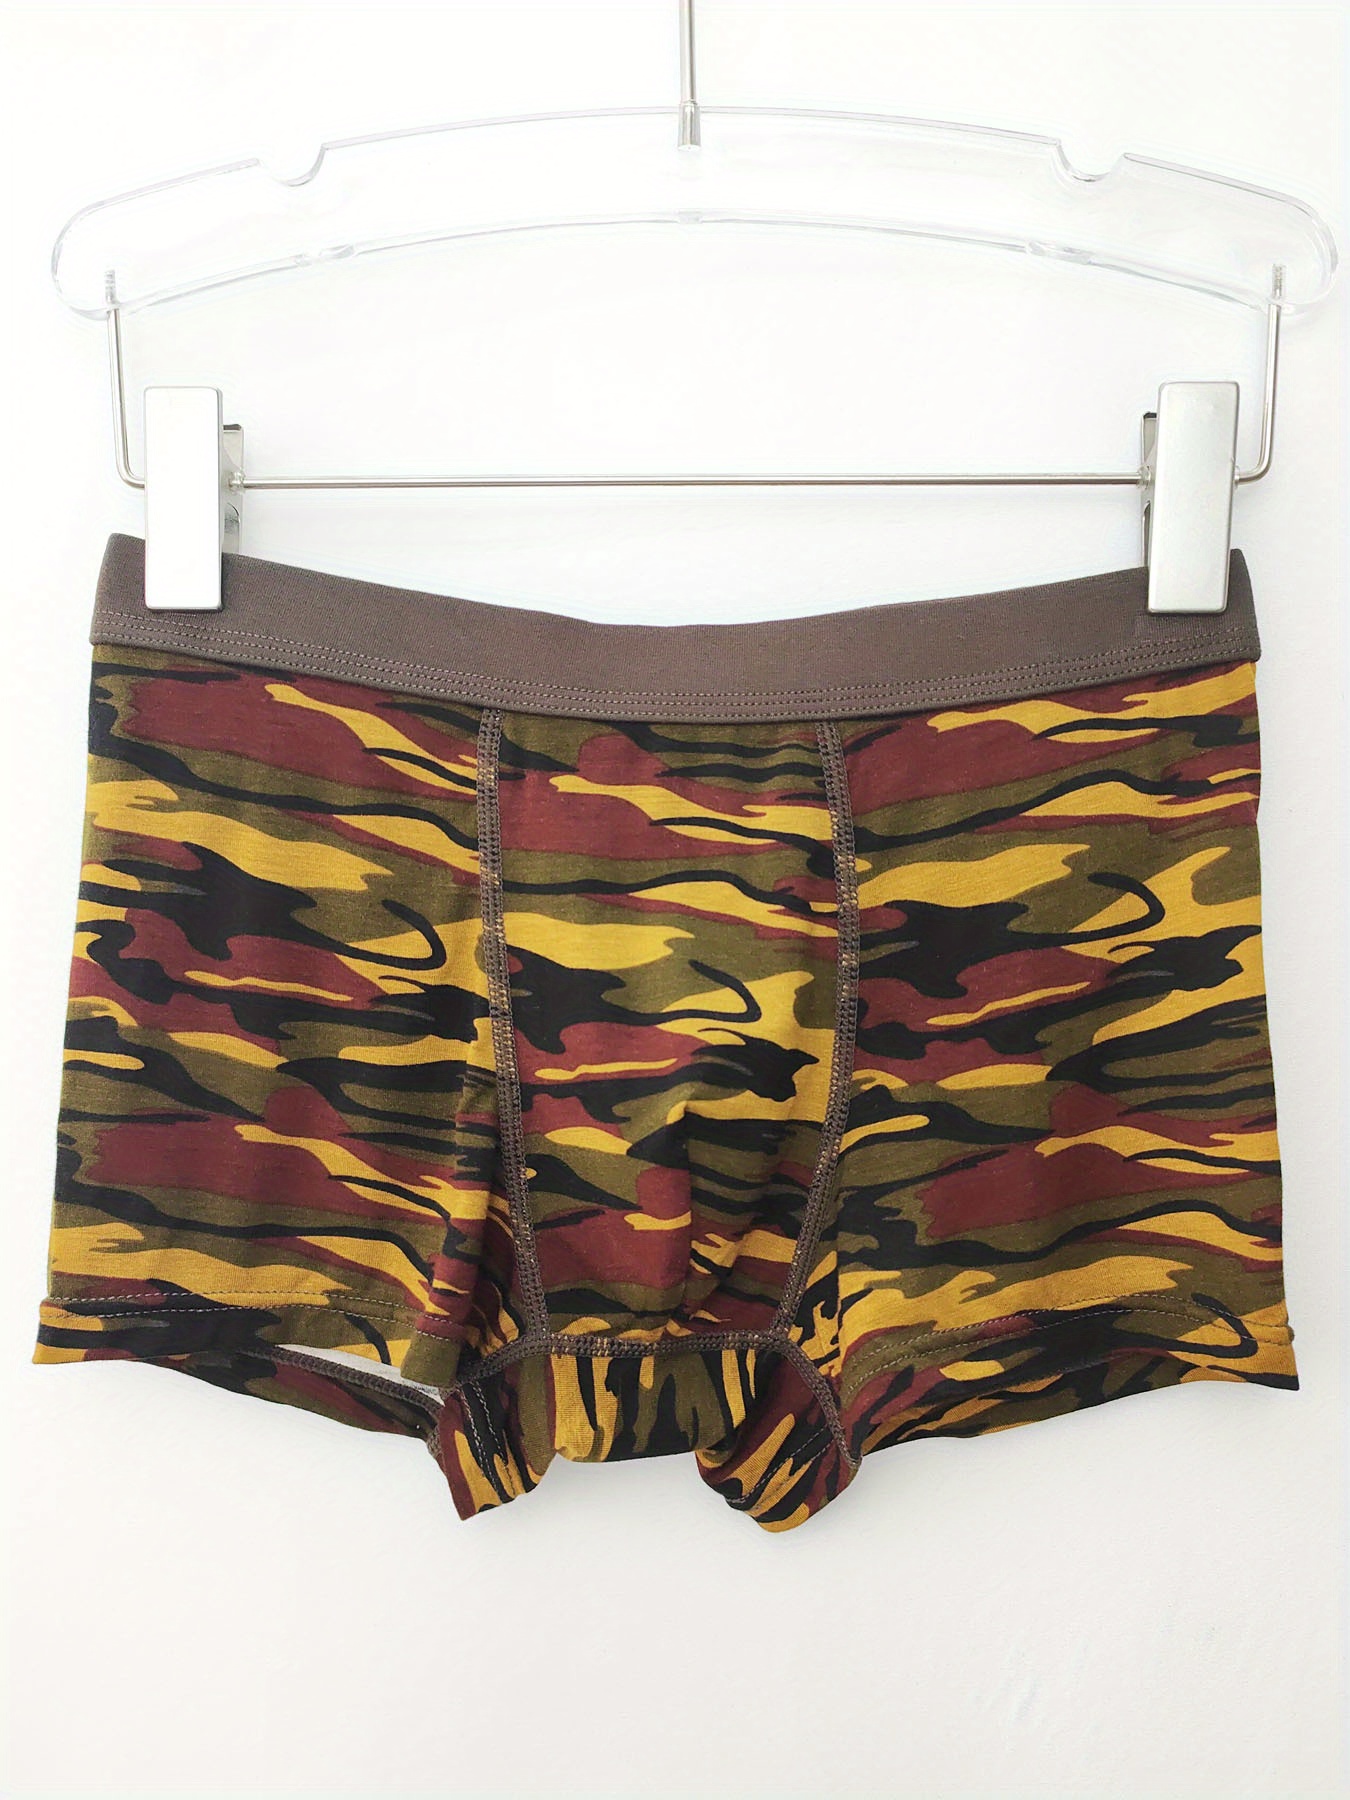 Military Army Camouflage Men's Underwear Soft Low Rise Briefs Stretch  Trunks Underpants